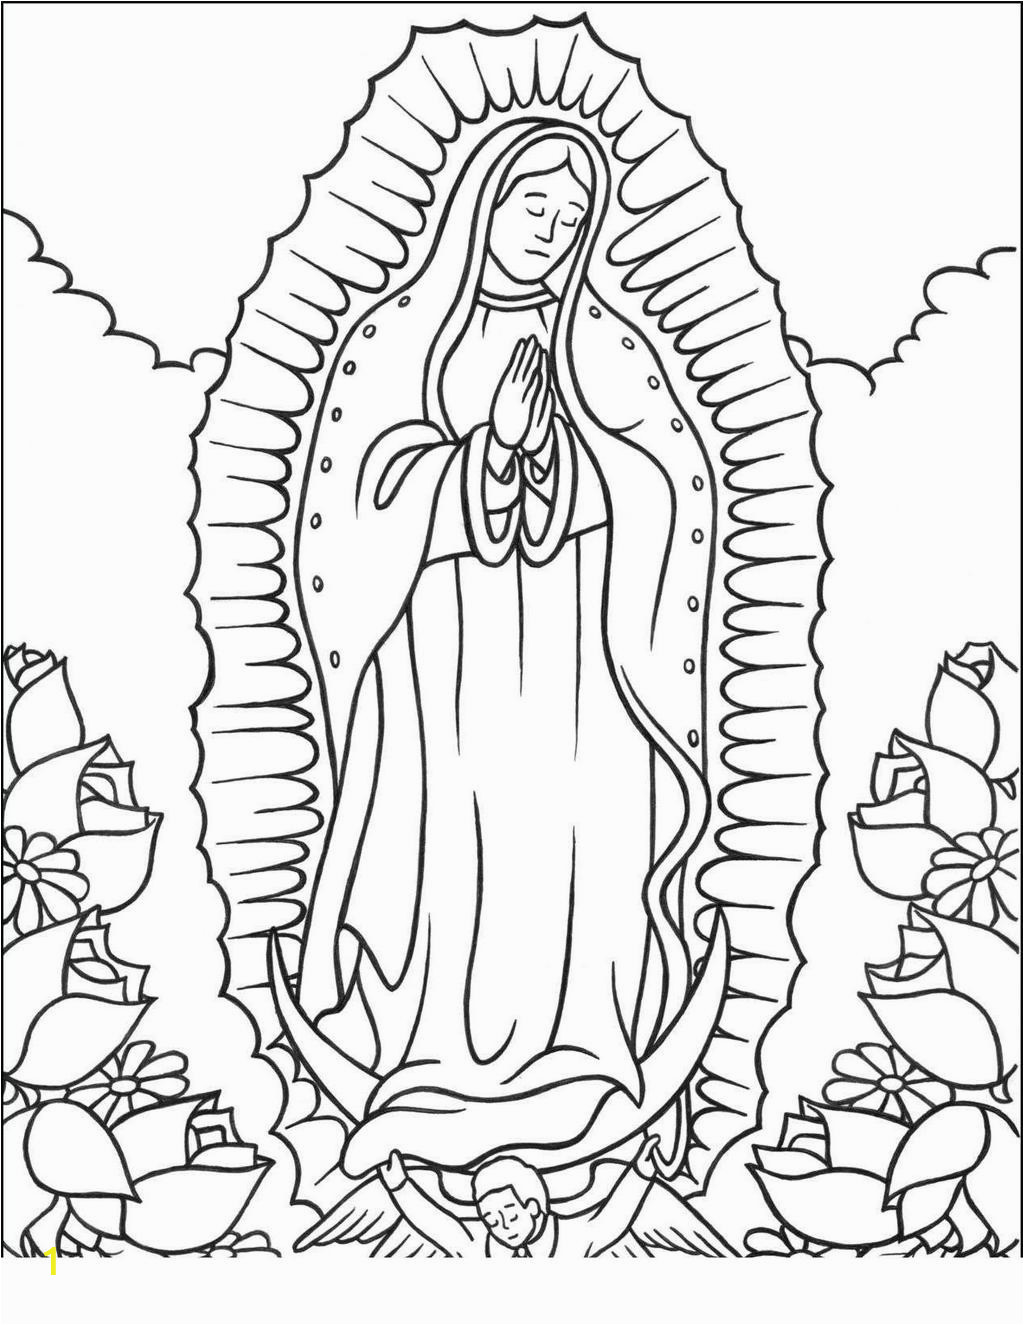 Our Lady Of Guadalupe Coloring Page Our Lady Guadalupe Coloring Page for Kids Wallpapers